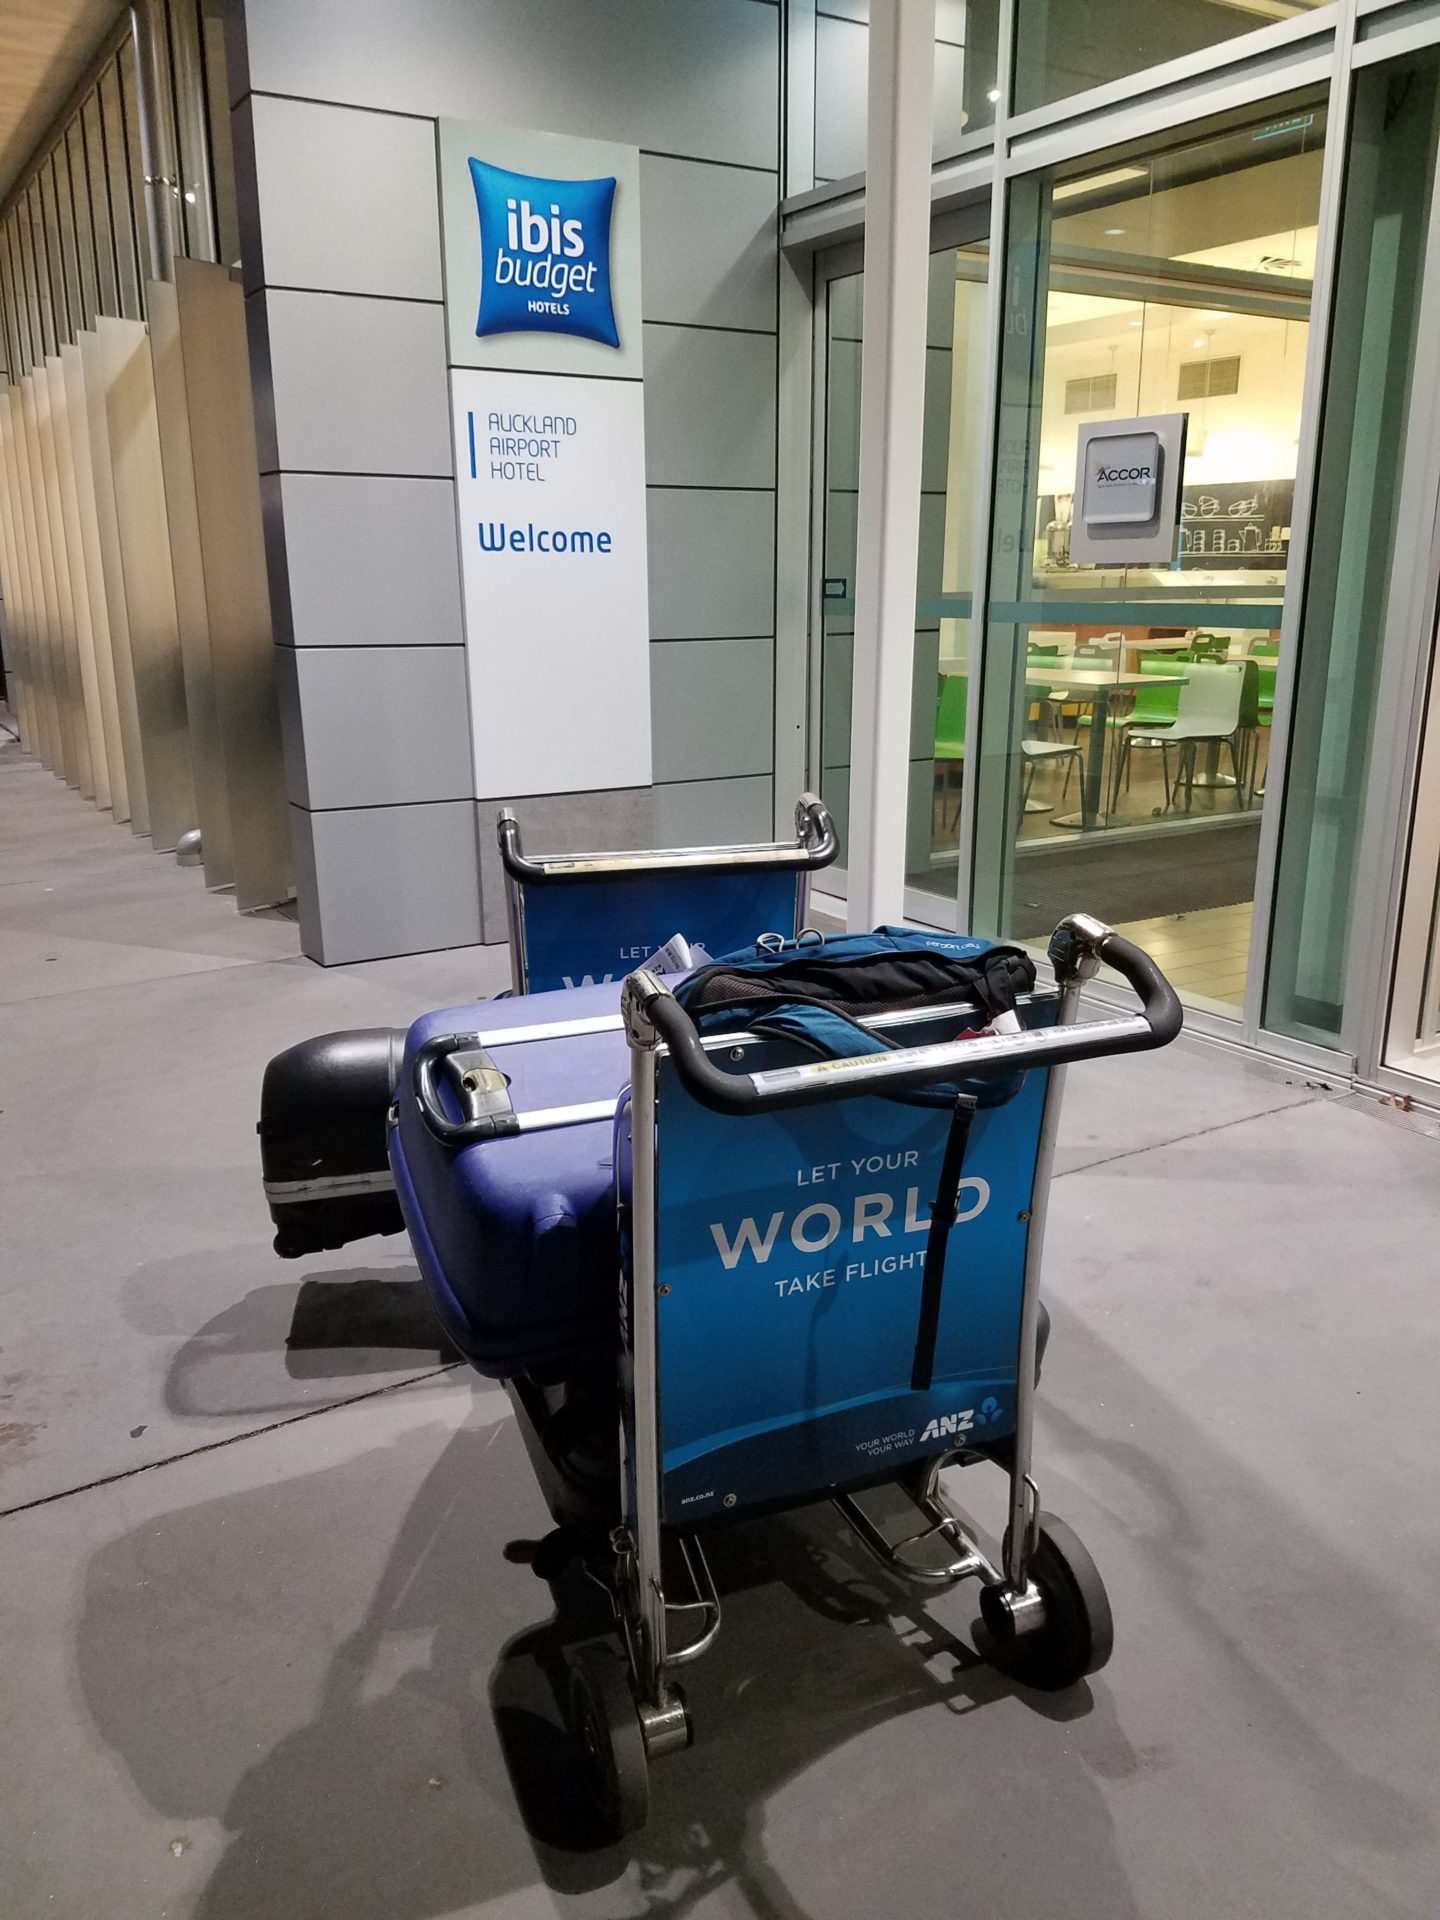 a blue luggage cart in front of a building